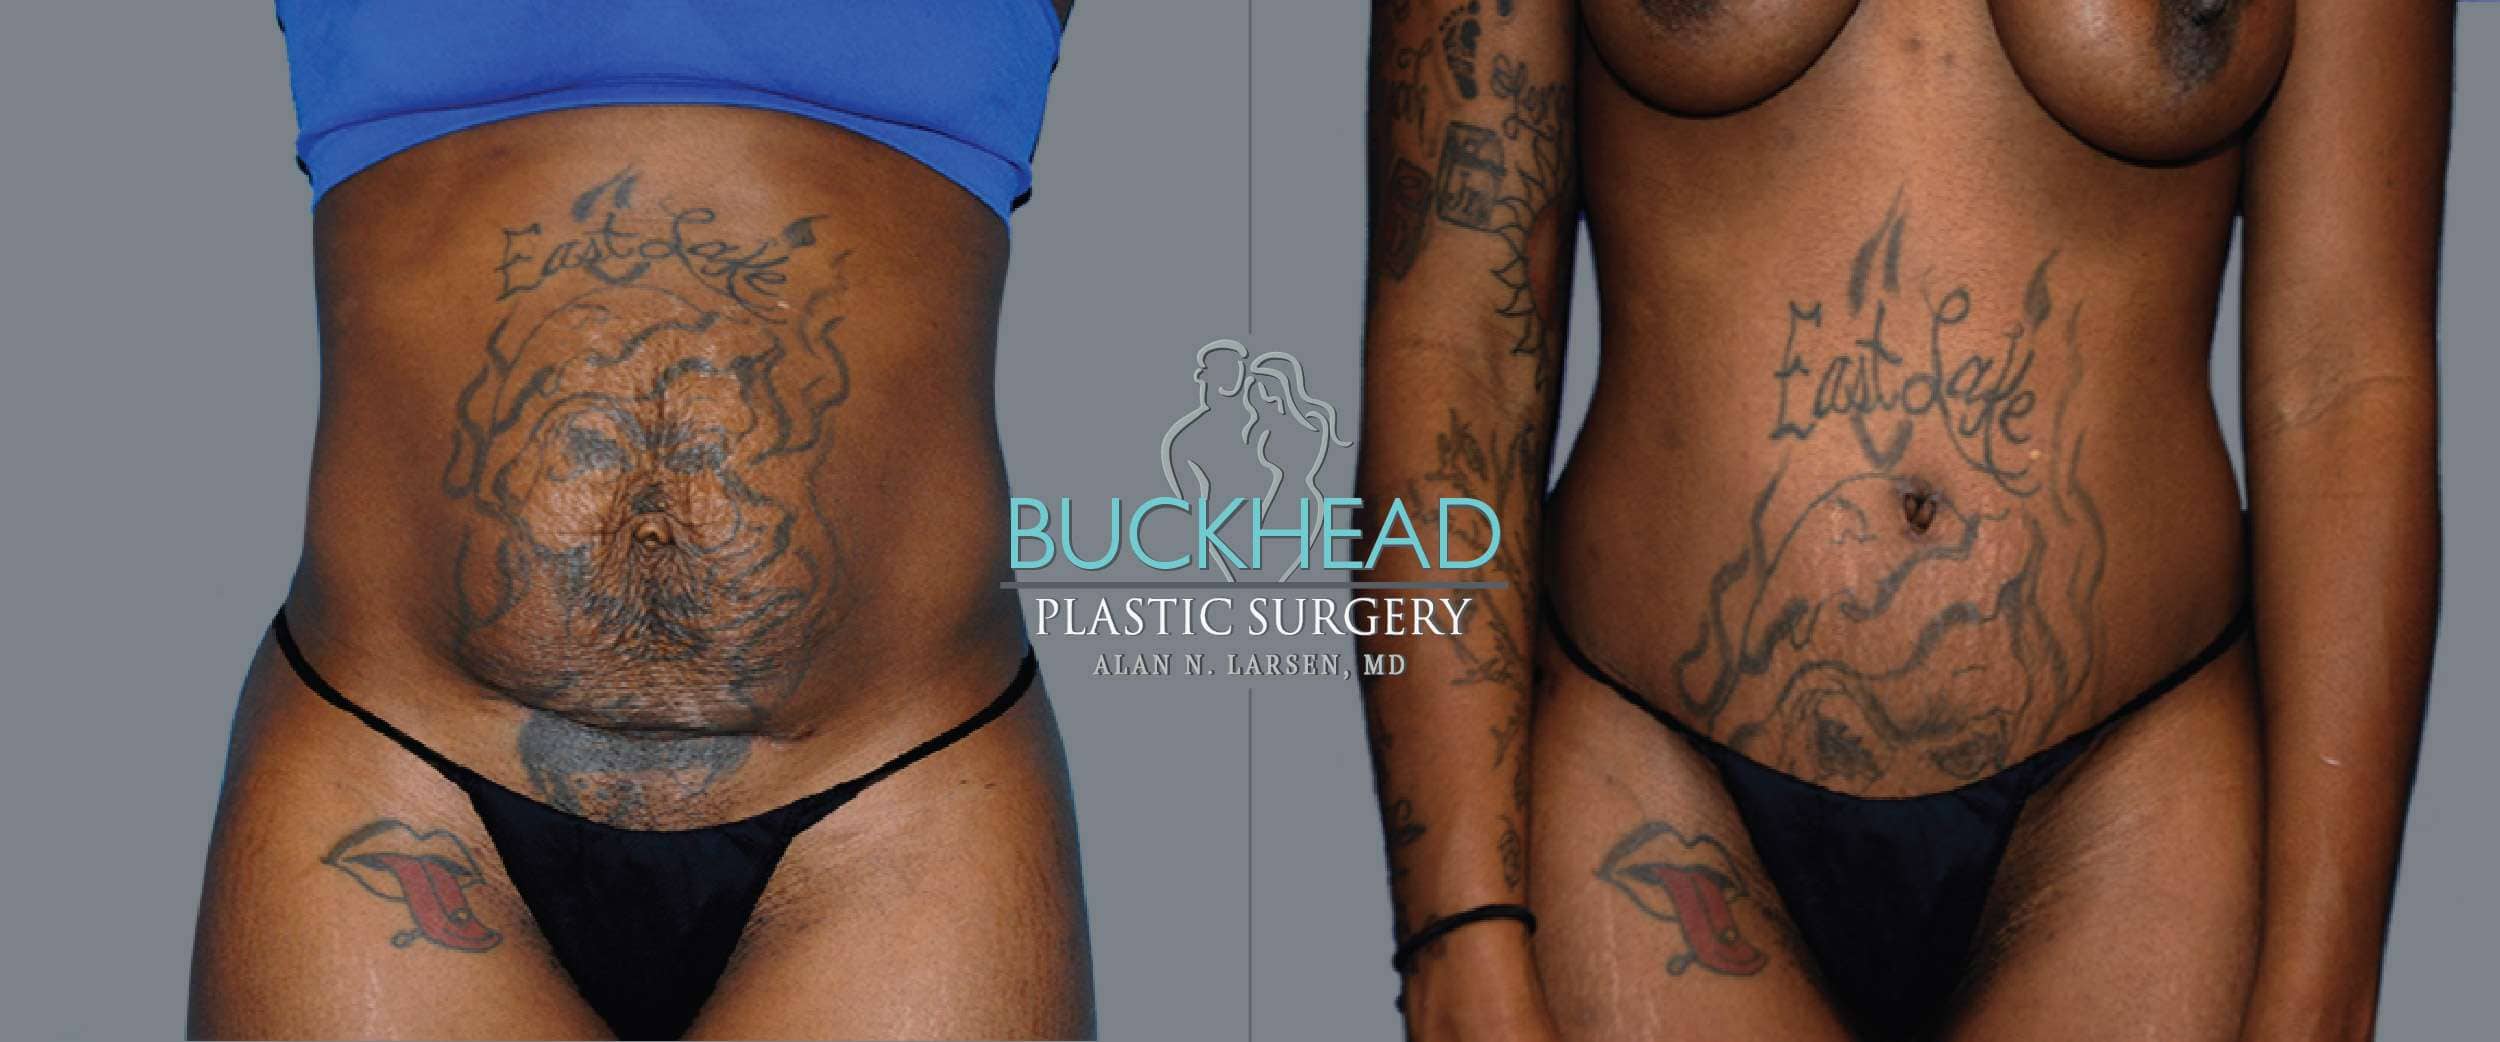 Before and After Photo gallery | Tummy Tuck | Buckhead Plastic Surgery | Board-Certified Plastic Surgeon in Atlanta GA